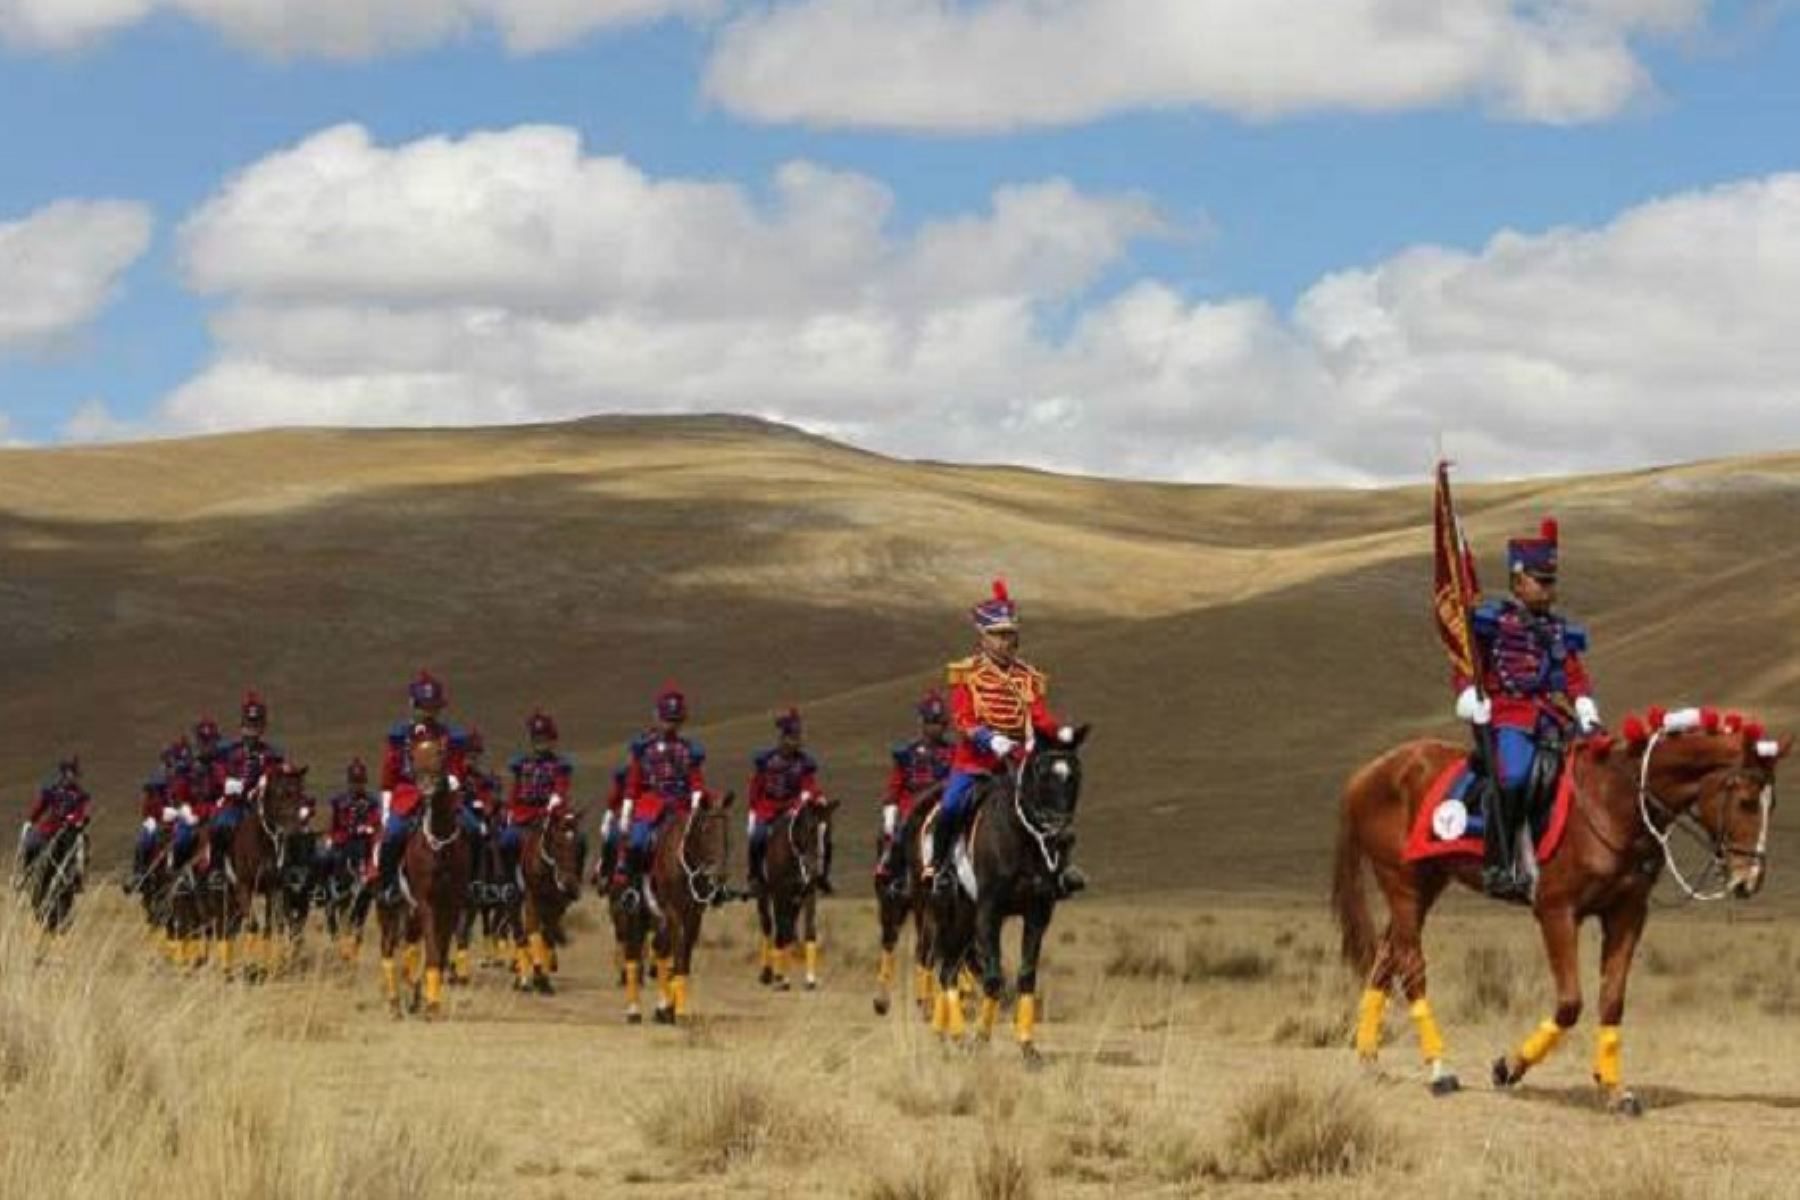 August 6 is a national holiday in Peru to commemorate the Battle of Junín, where the patriot army led by Simón Bolívar and Antonio José de Sucre defeated the Spanish army led by José Canterac, contributing to the independence of Peru and South America.  Andean Photo